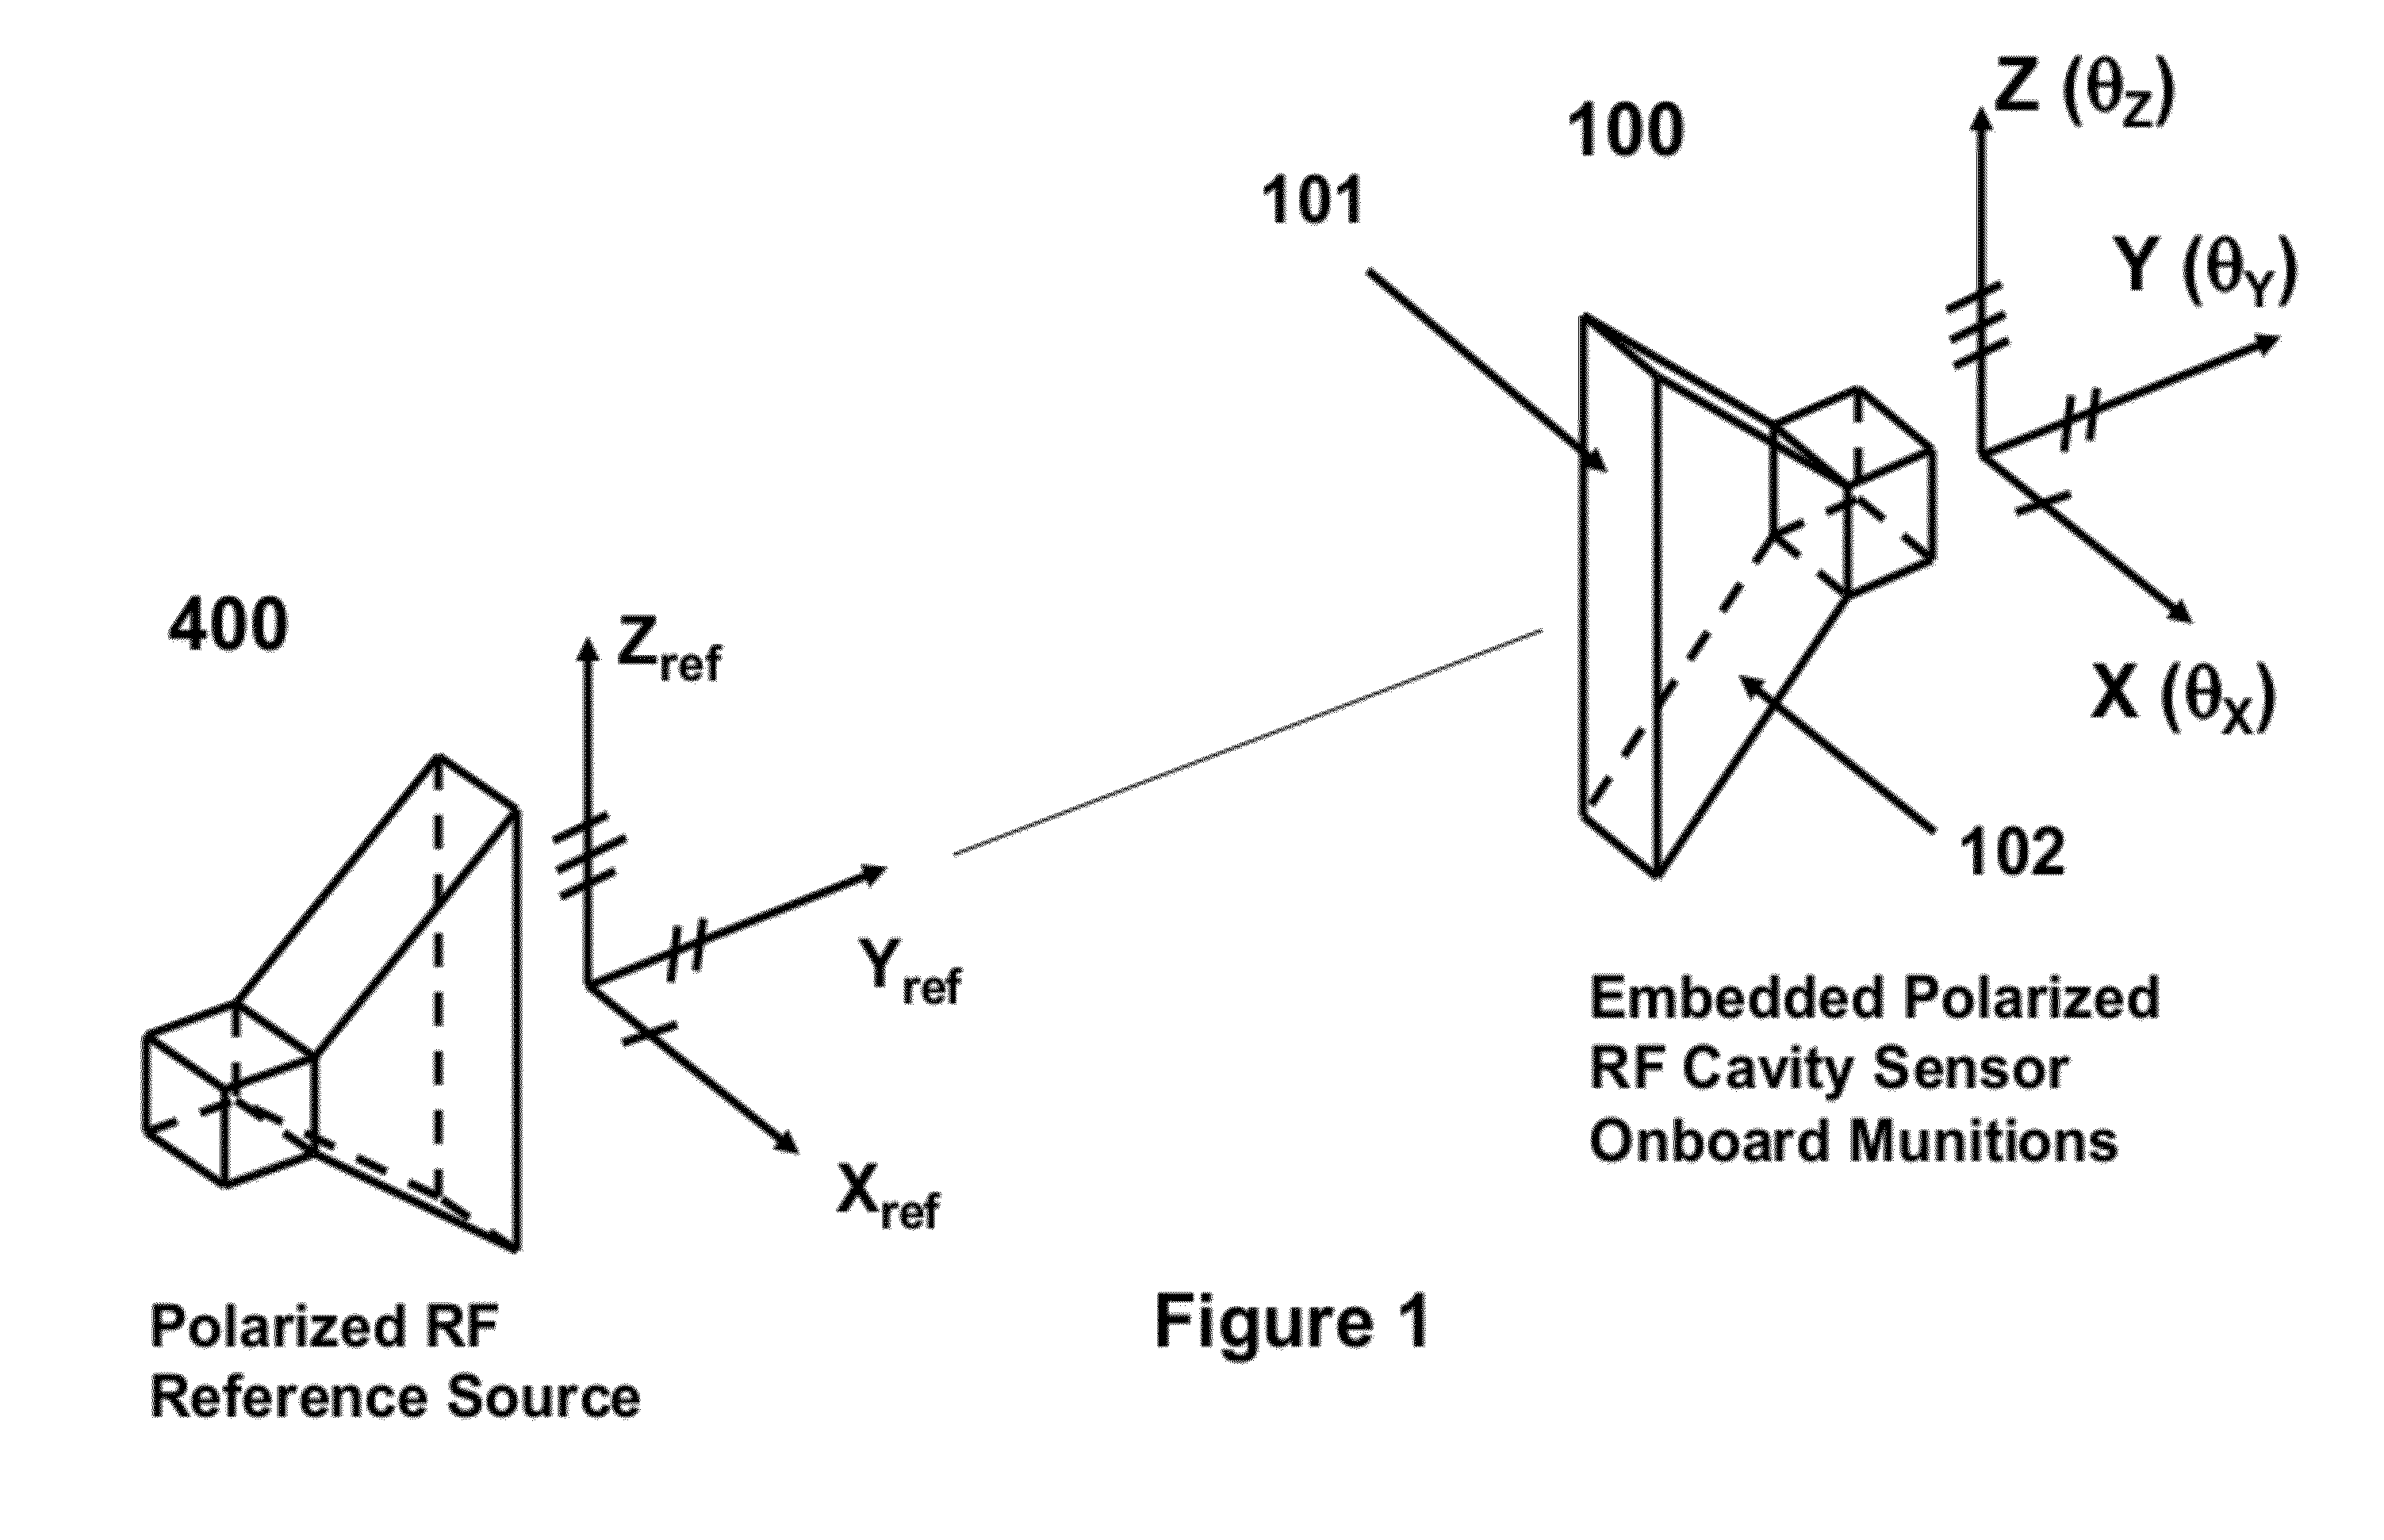 System and method for roll angle indication and measurement in flying objects